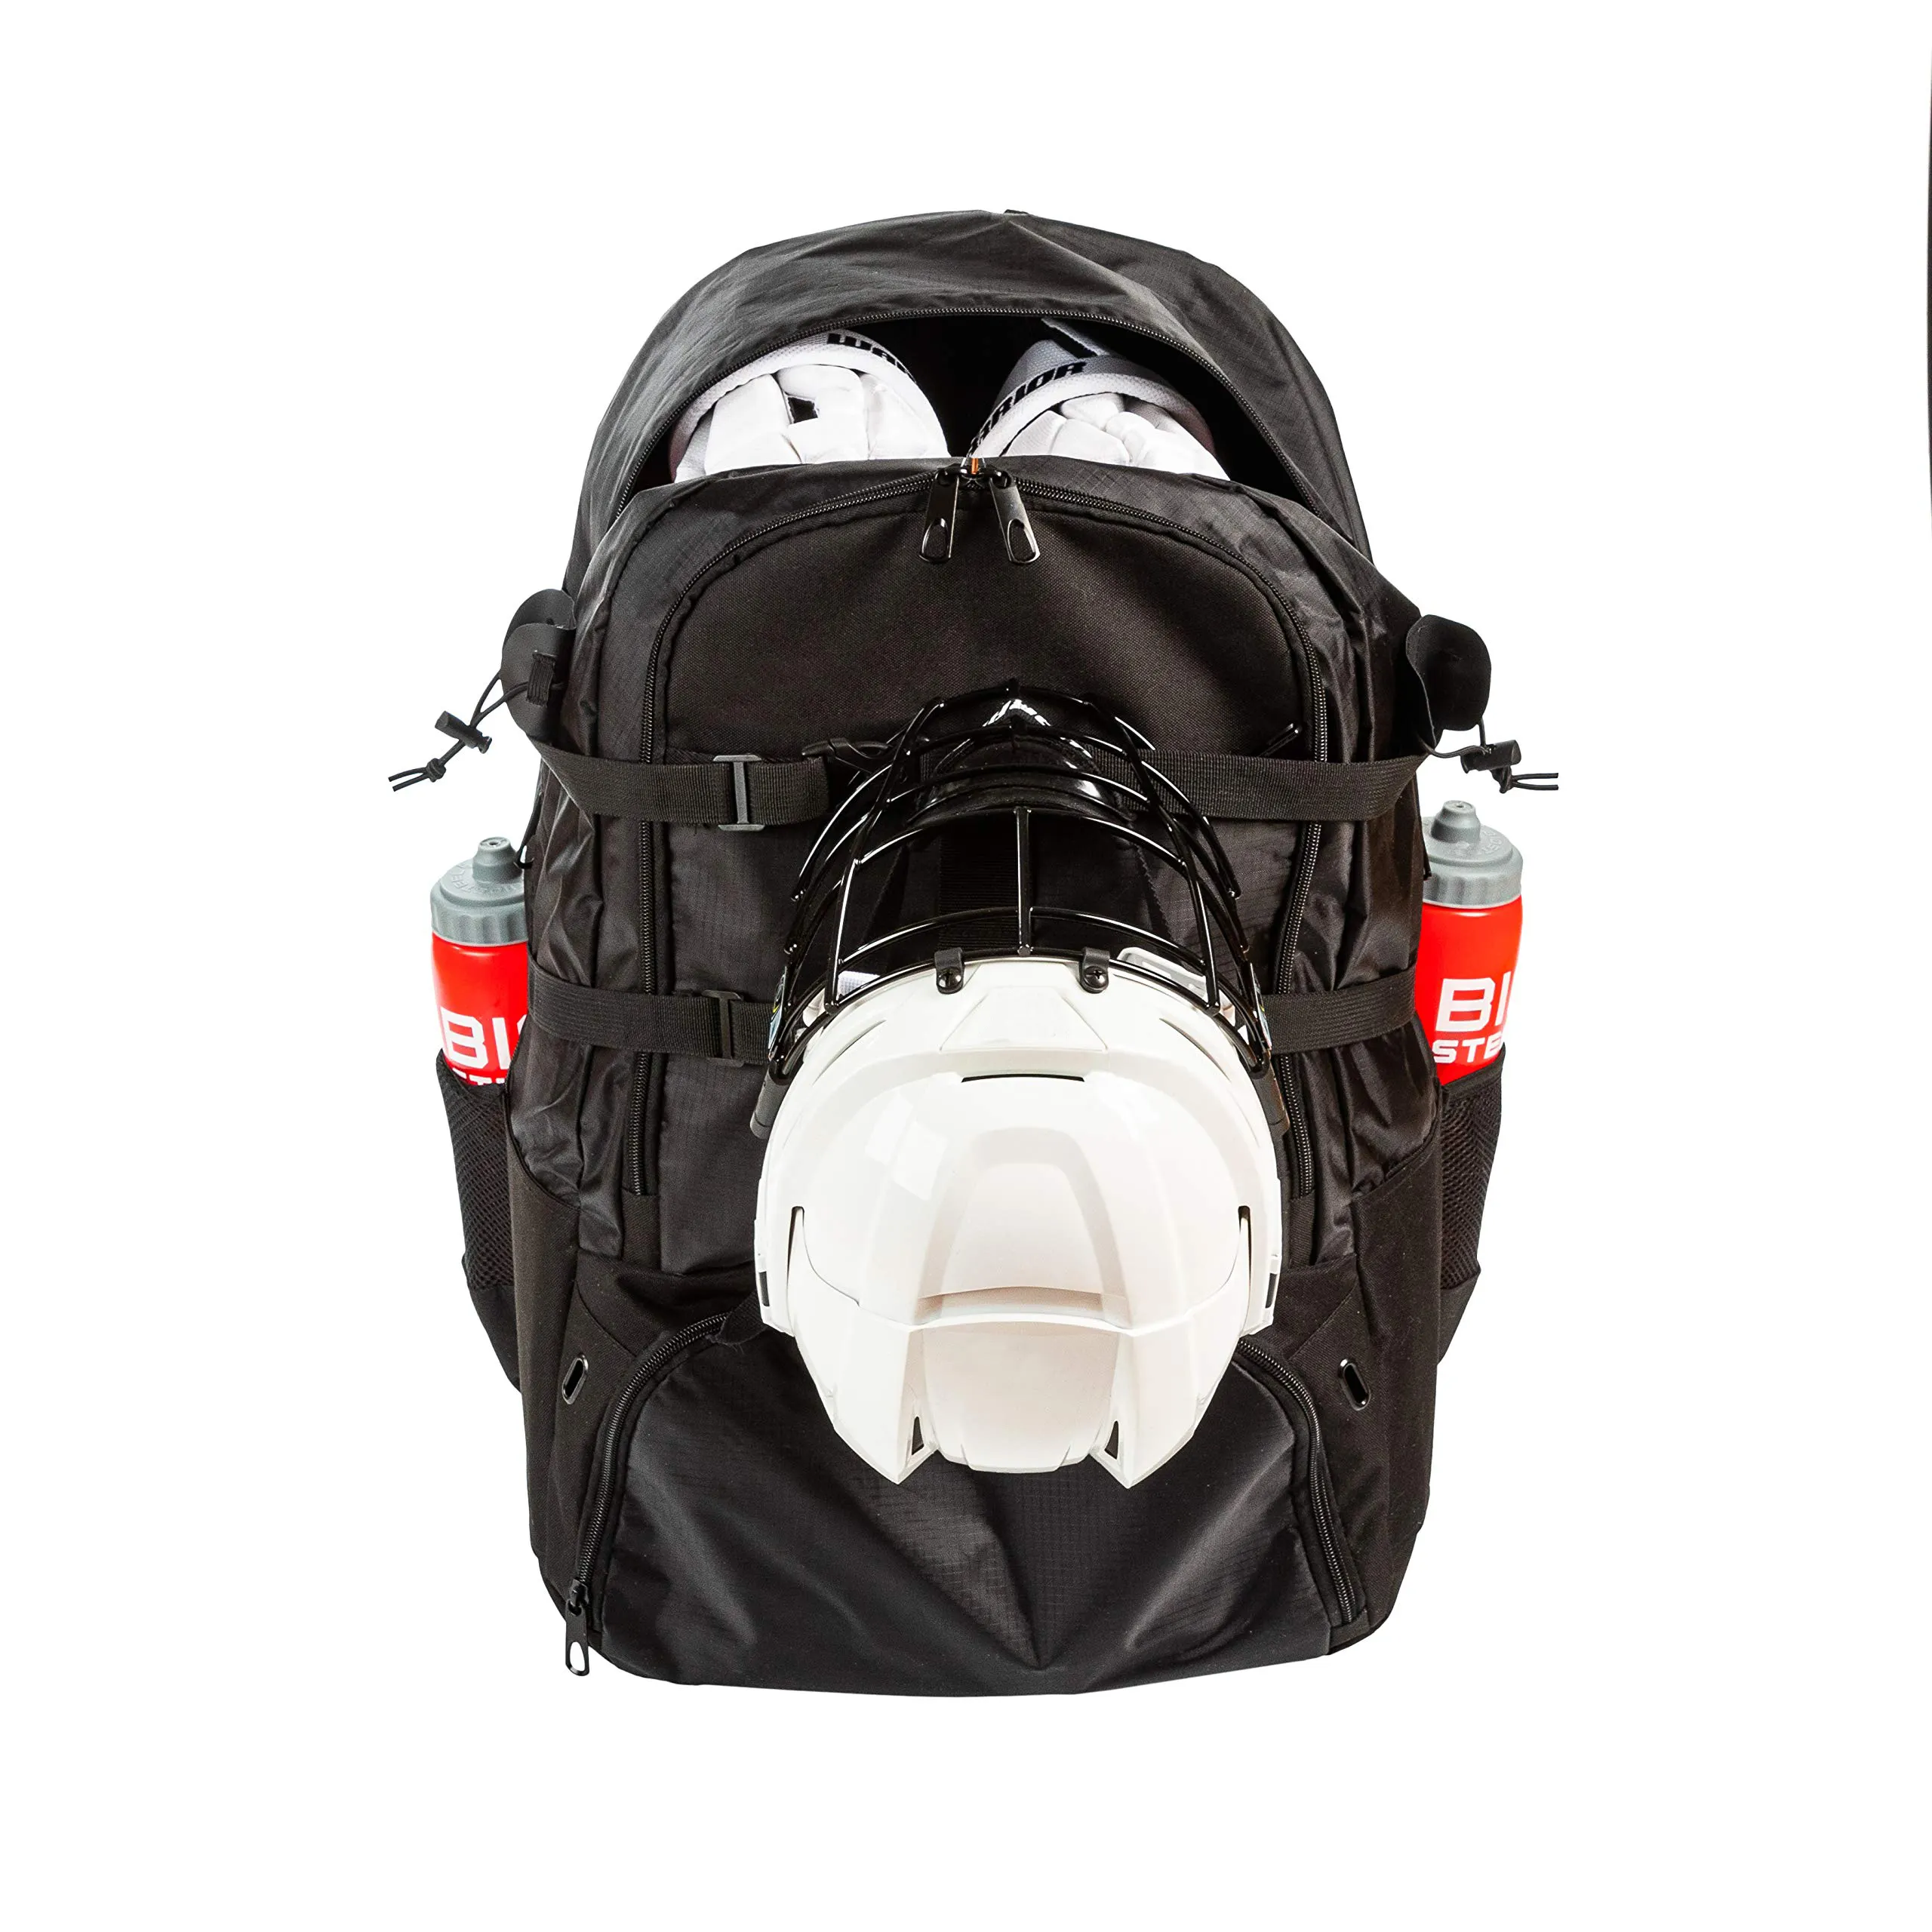 XXL Premium Lacrosse Bag, Trusted Quality Sports Lacrosse Backpack for Men and Women; Great for Lacrosse, Field Hockey